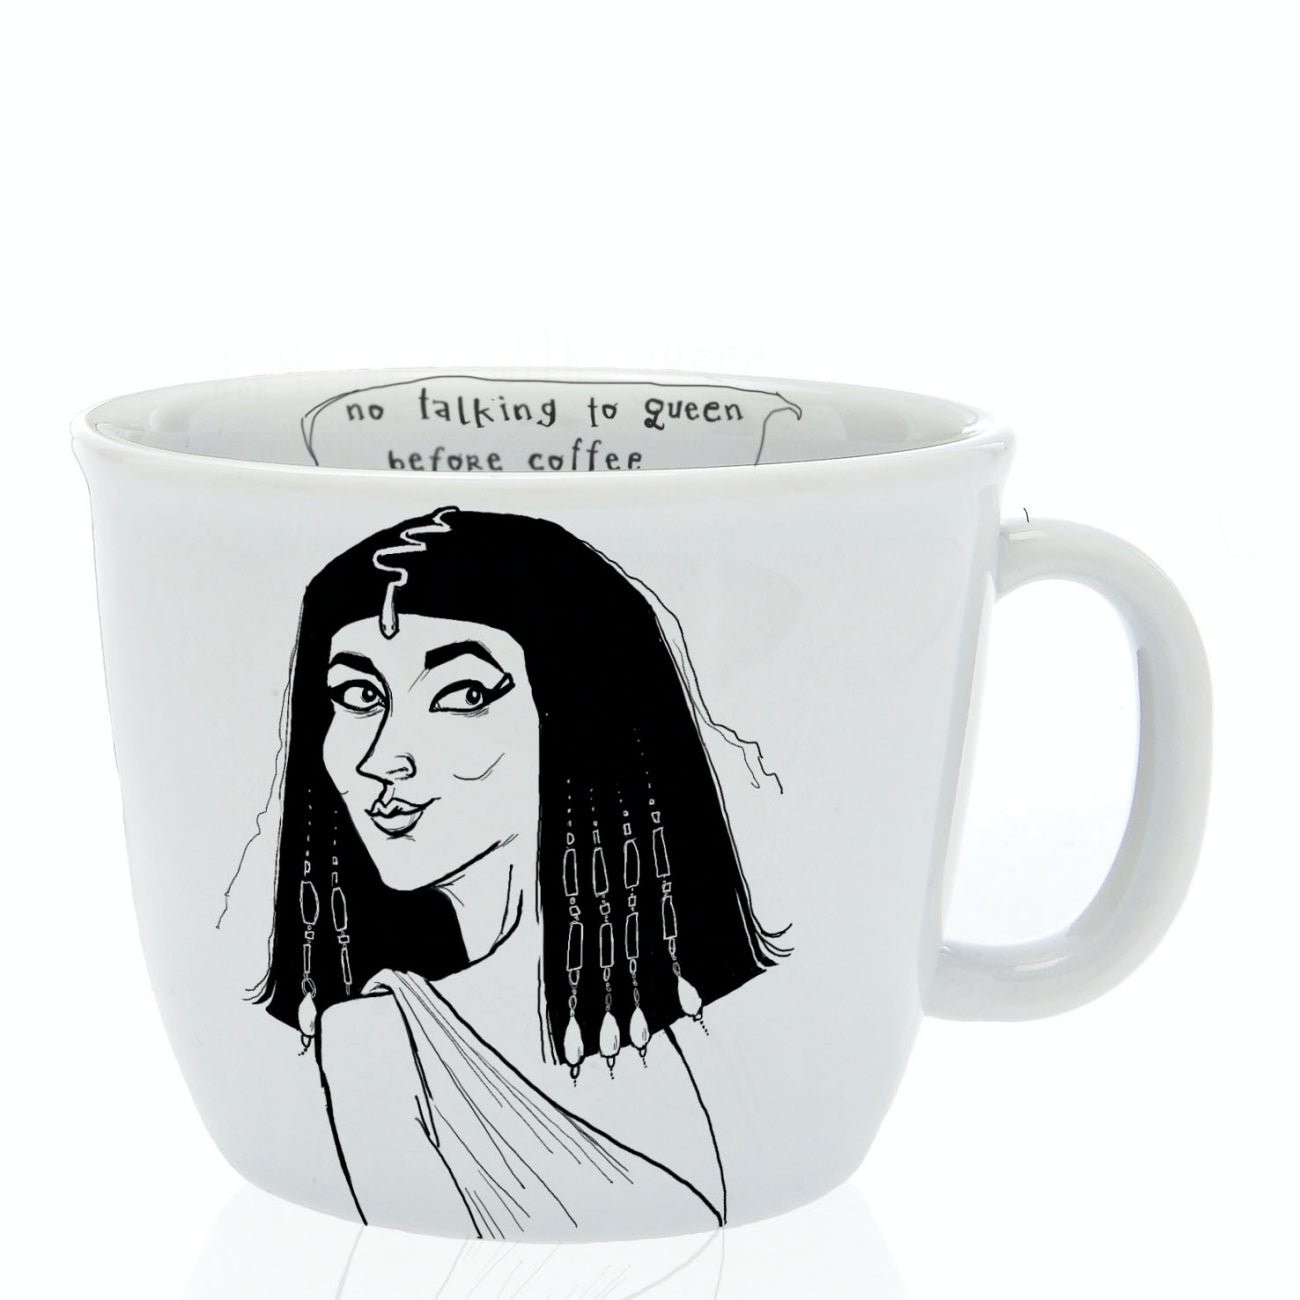 Porcelain cup inspired by Cleopatra